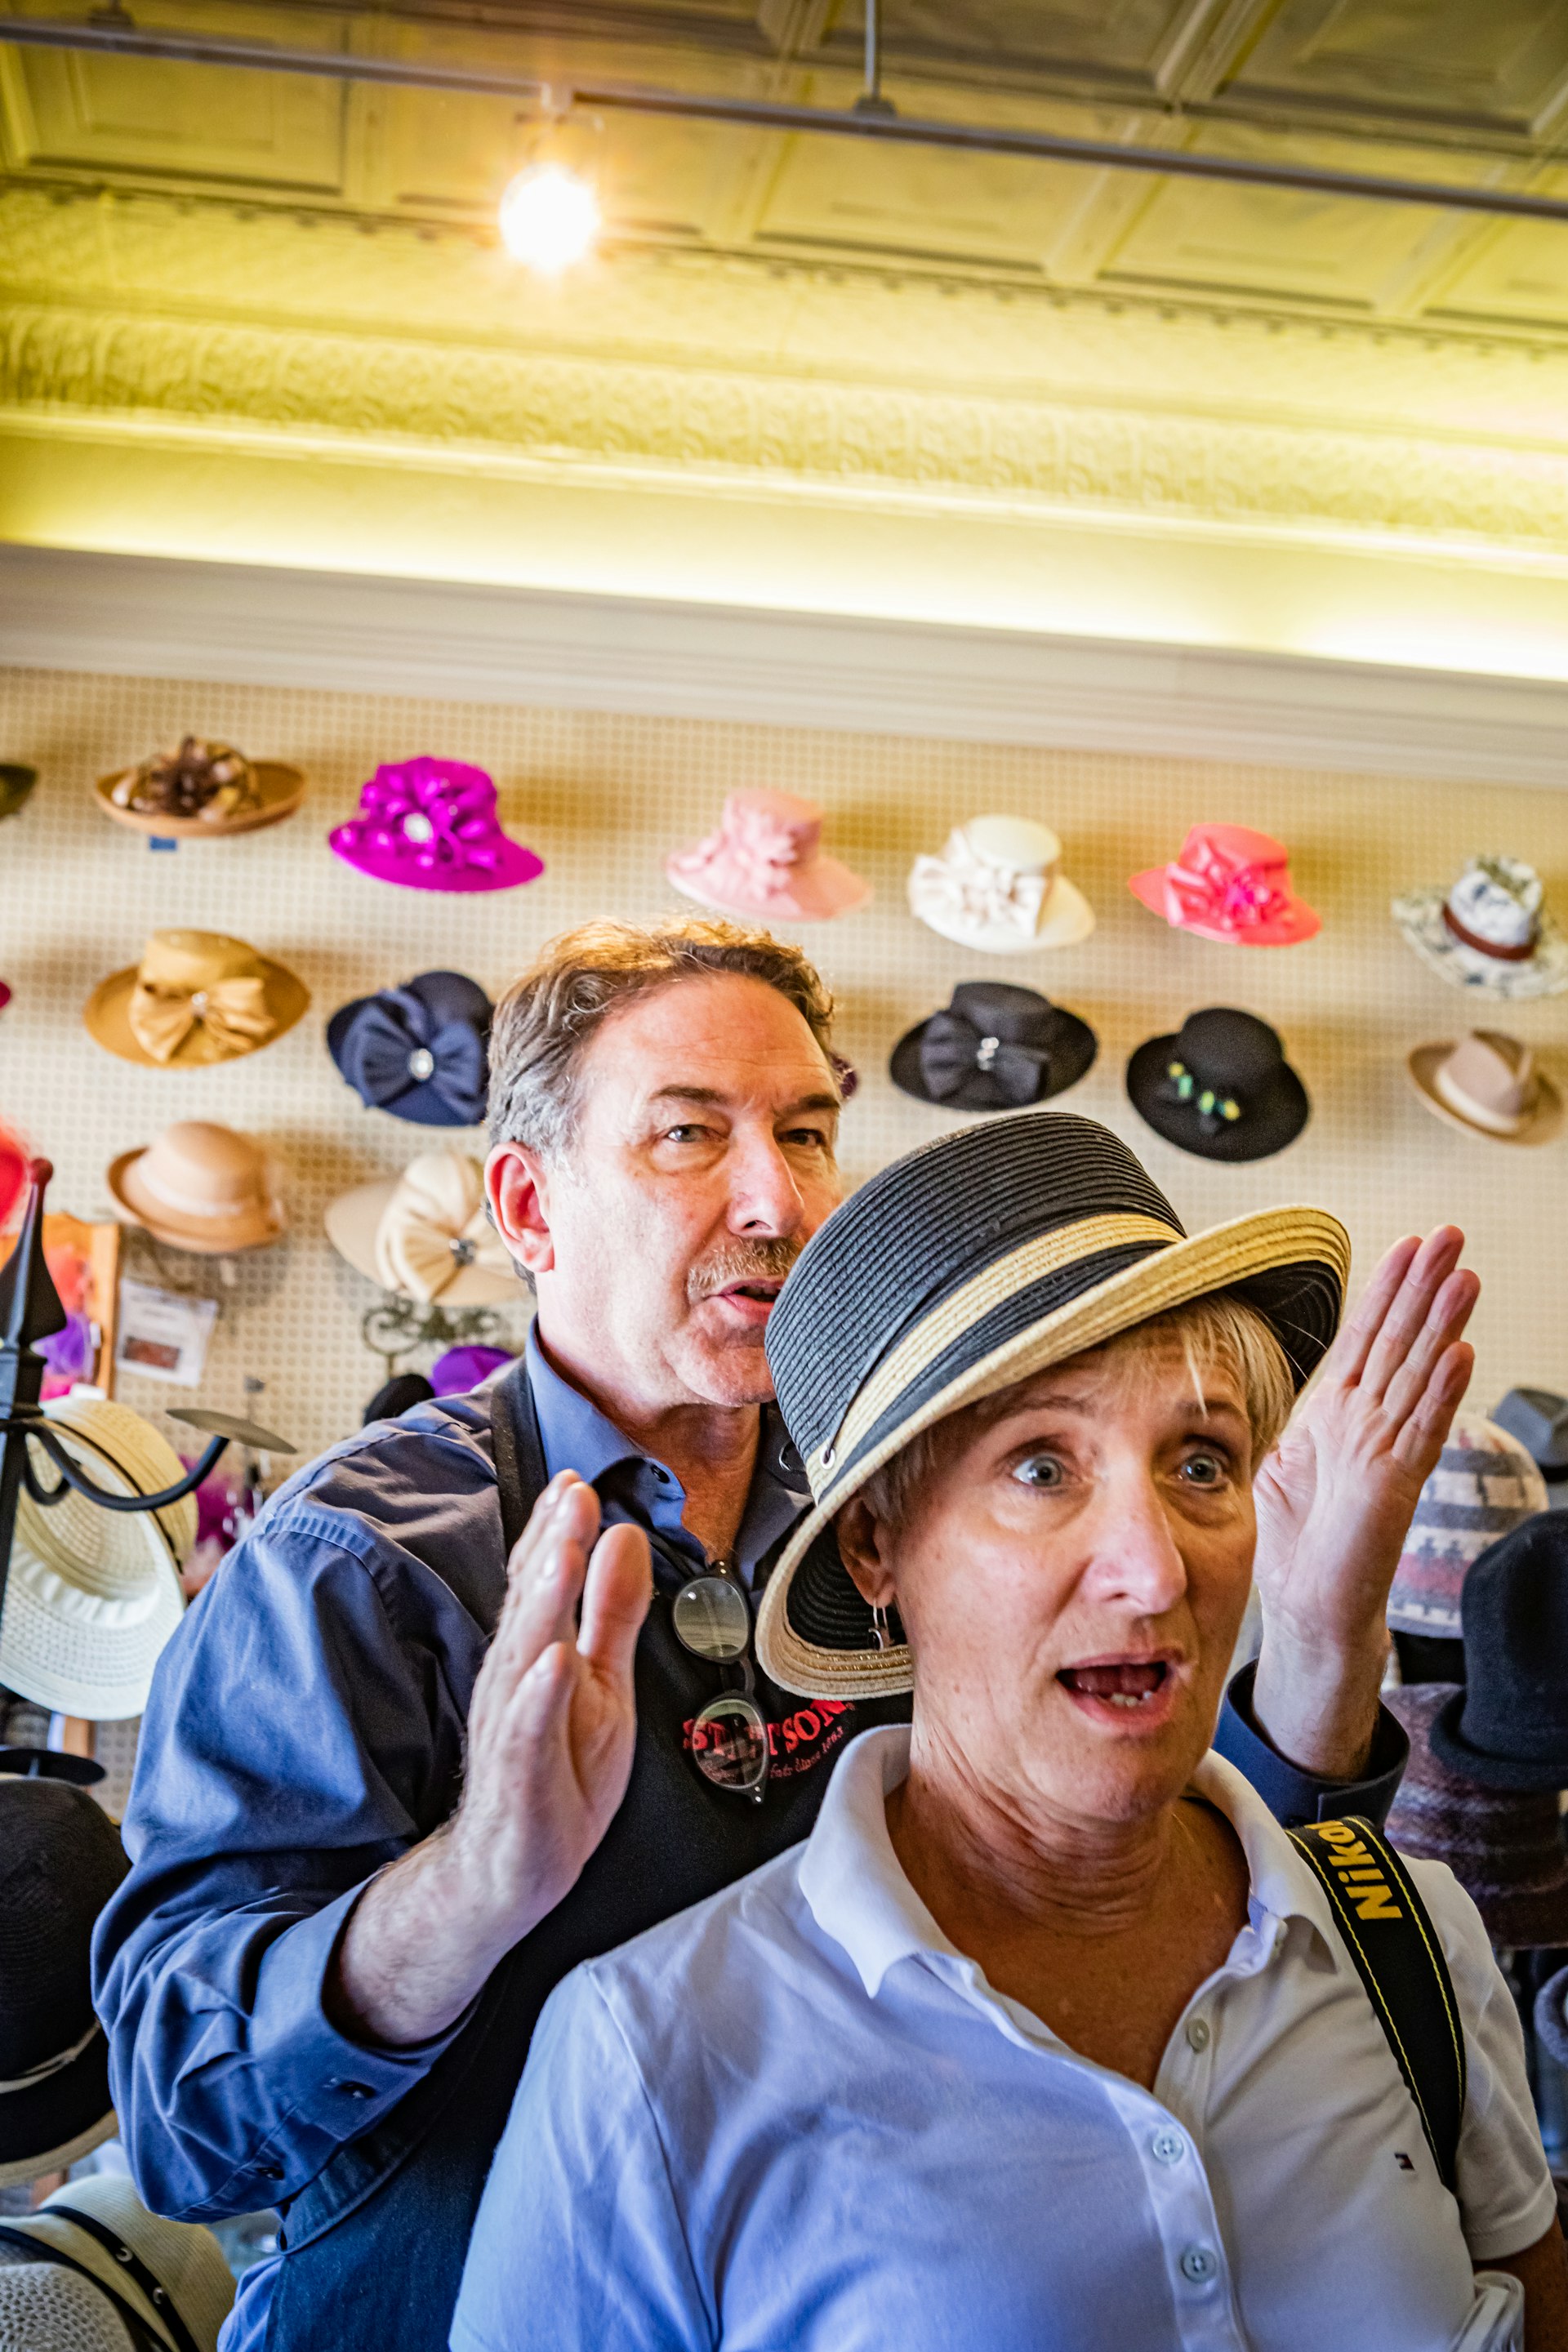 Jack Kellogg stands behind a female customer with short blond hair as she tries on a black and cream straw hat. He has a look of confident, kind expertise on his face and is gesturing as if they've found just the right angle. The customer's face is one of pleased surprise as she sees how the hat accentuates her facial features.